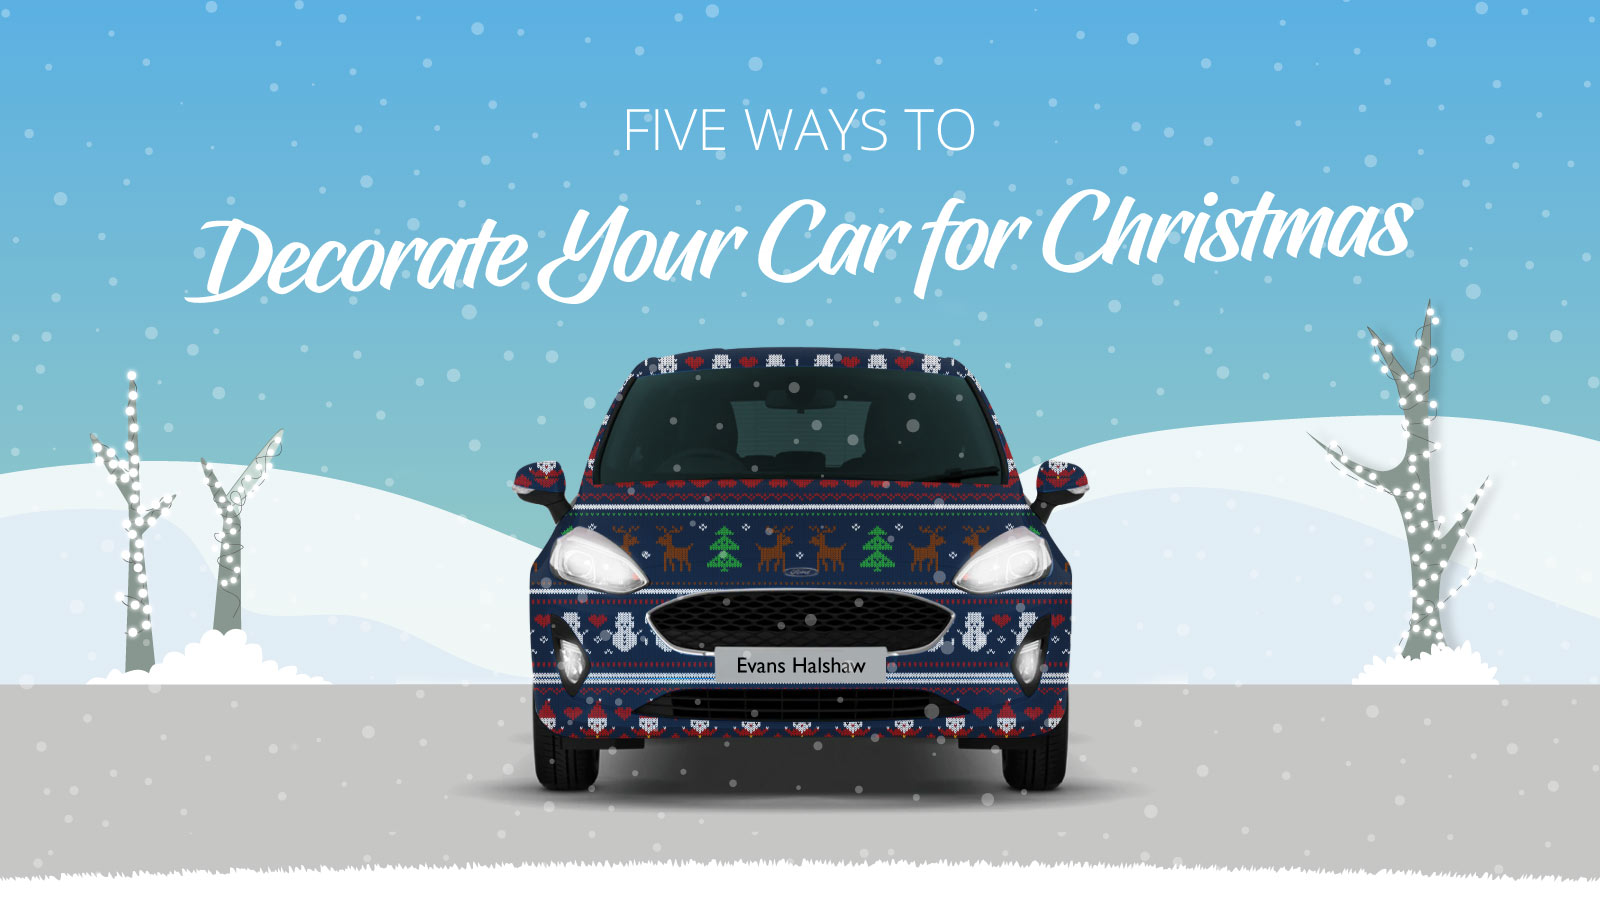 Ways to Decorate Your Car for Christmas